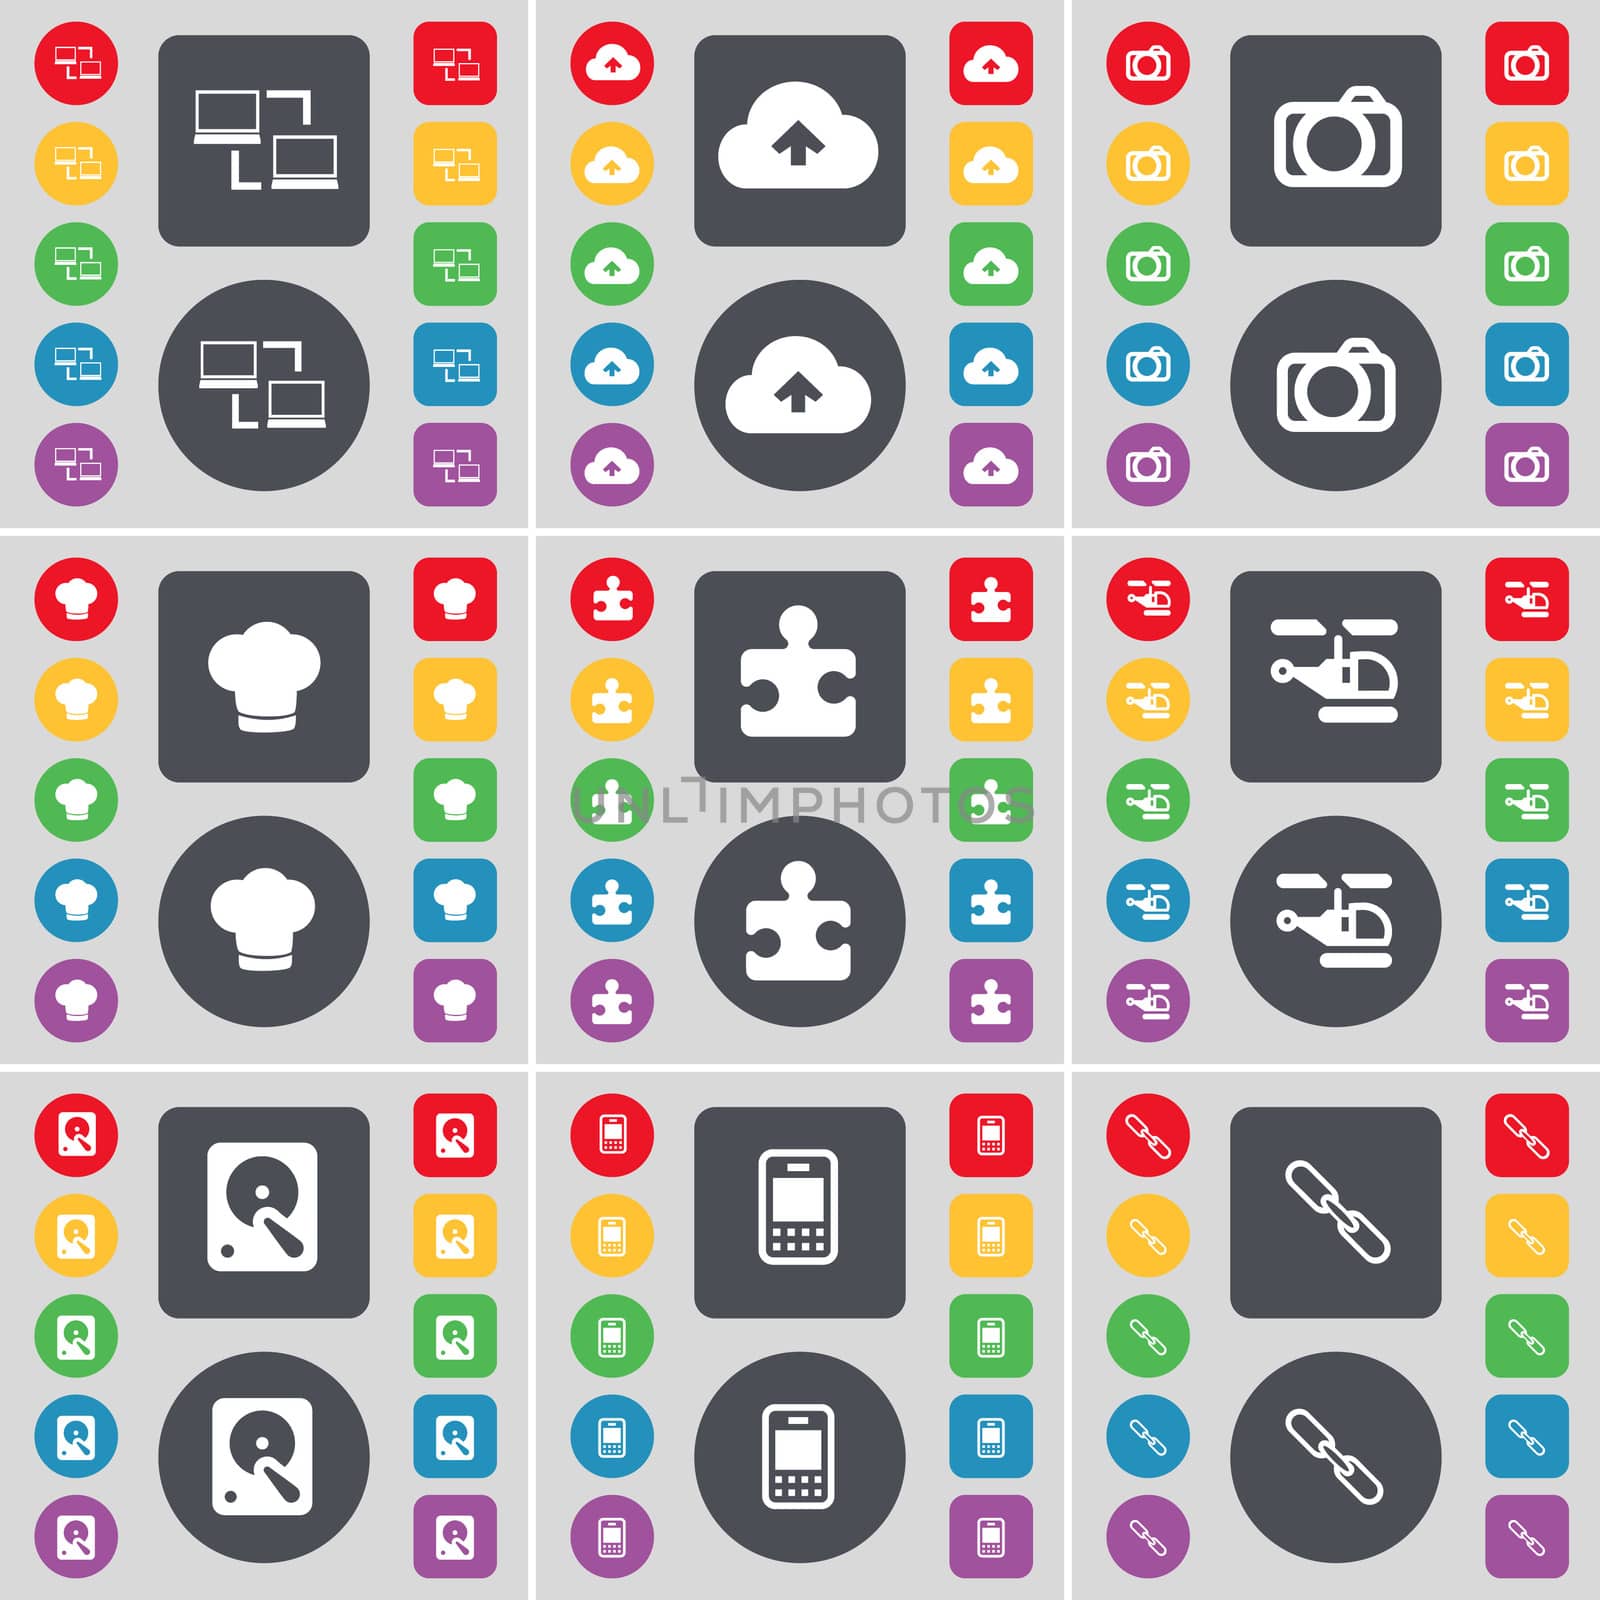 Connection, Cloud, Camera, Cooking hat, Puzzle part, Helicopter, Hard drive, Mobile phone, Link icon symbol. A large set of flat, colored buttons for your design. illustration